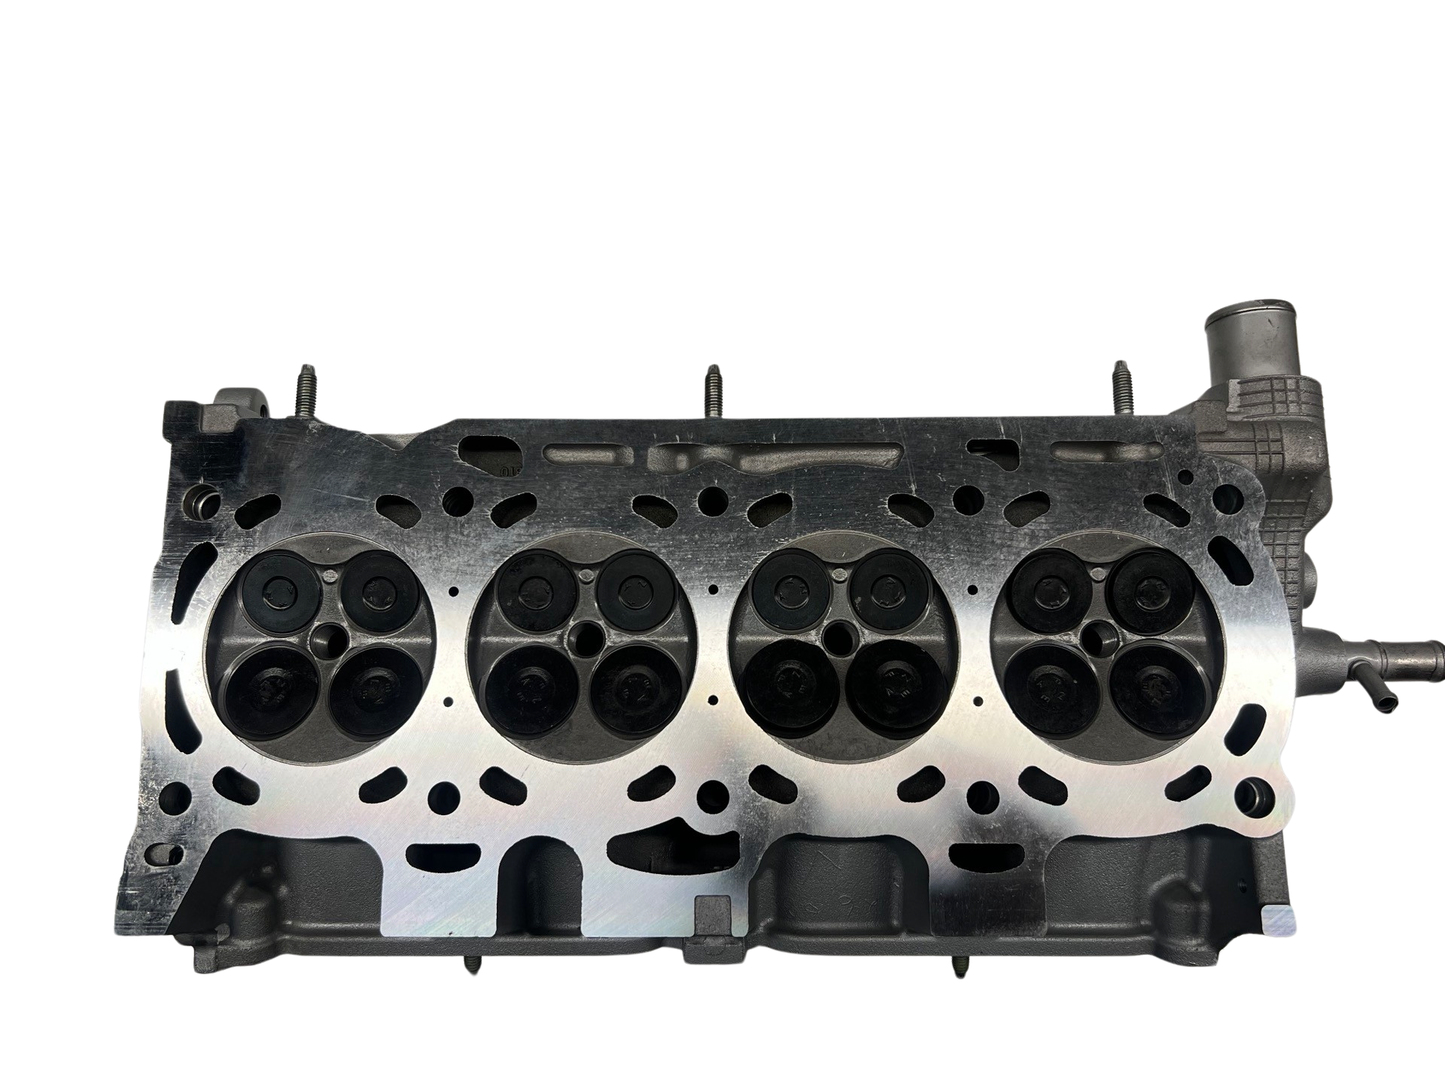 Bottom view of cylinder head for a Toyota 2.4L DOHC 2AZ-FE